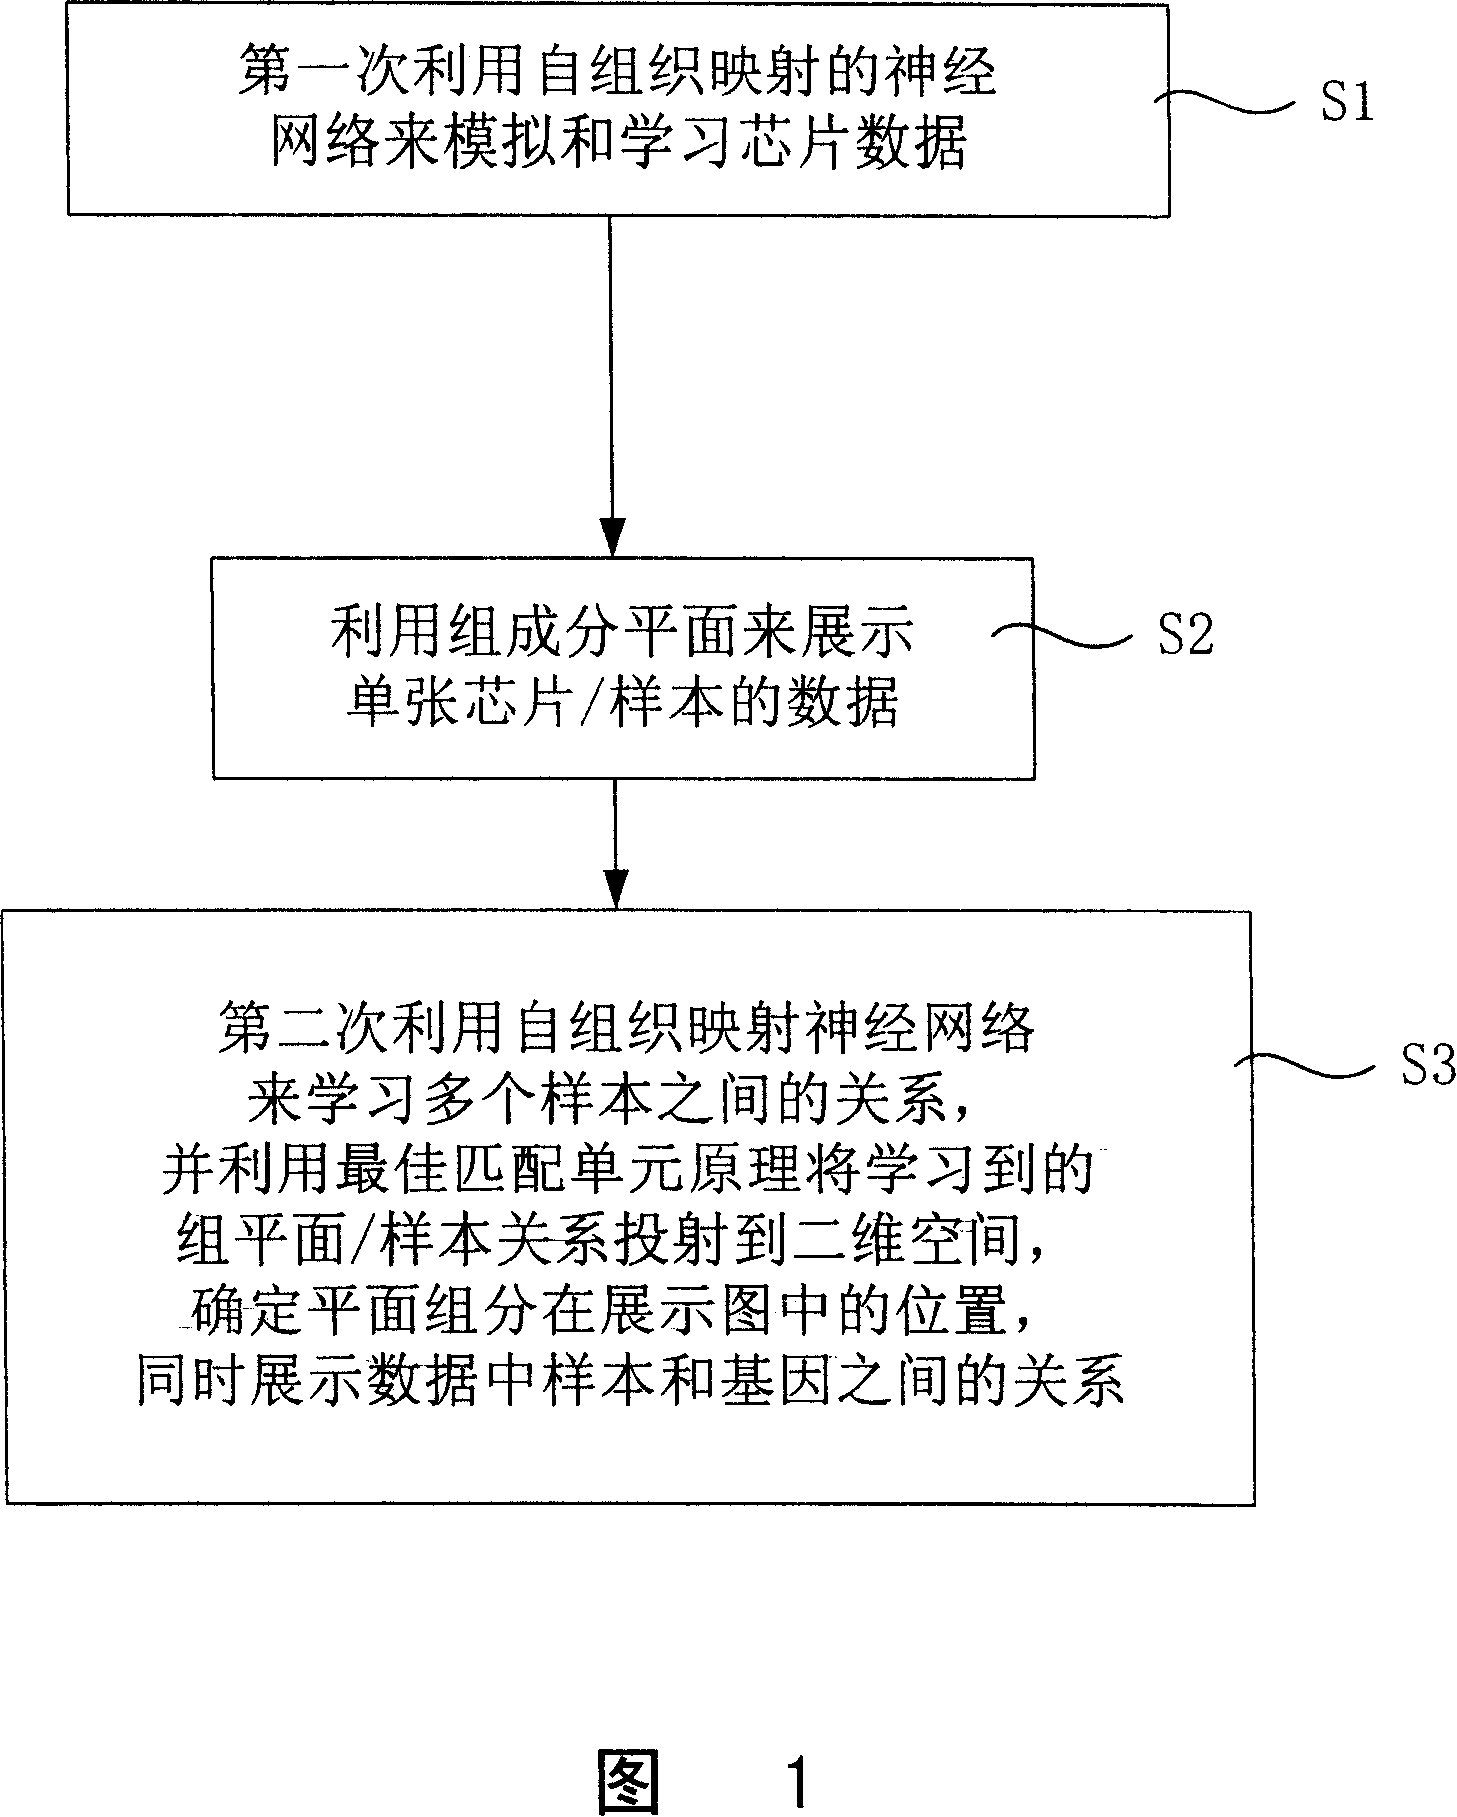 Visual analyzing and displaying method used for chip data analysis